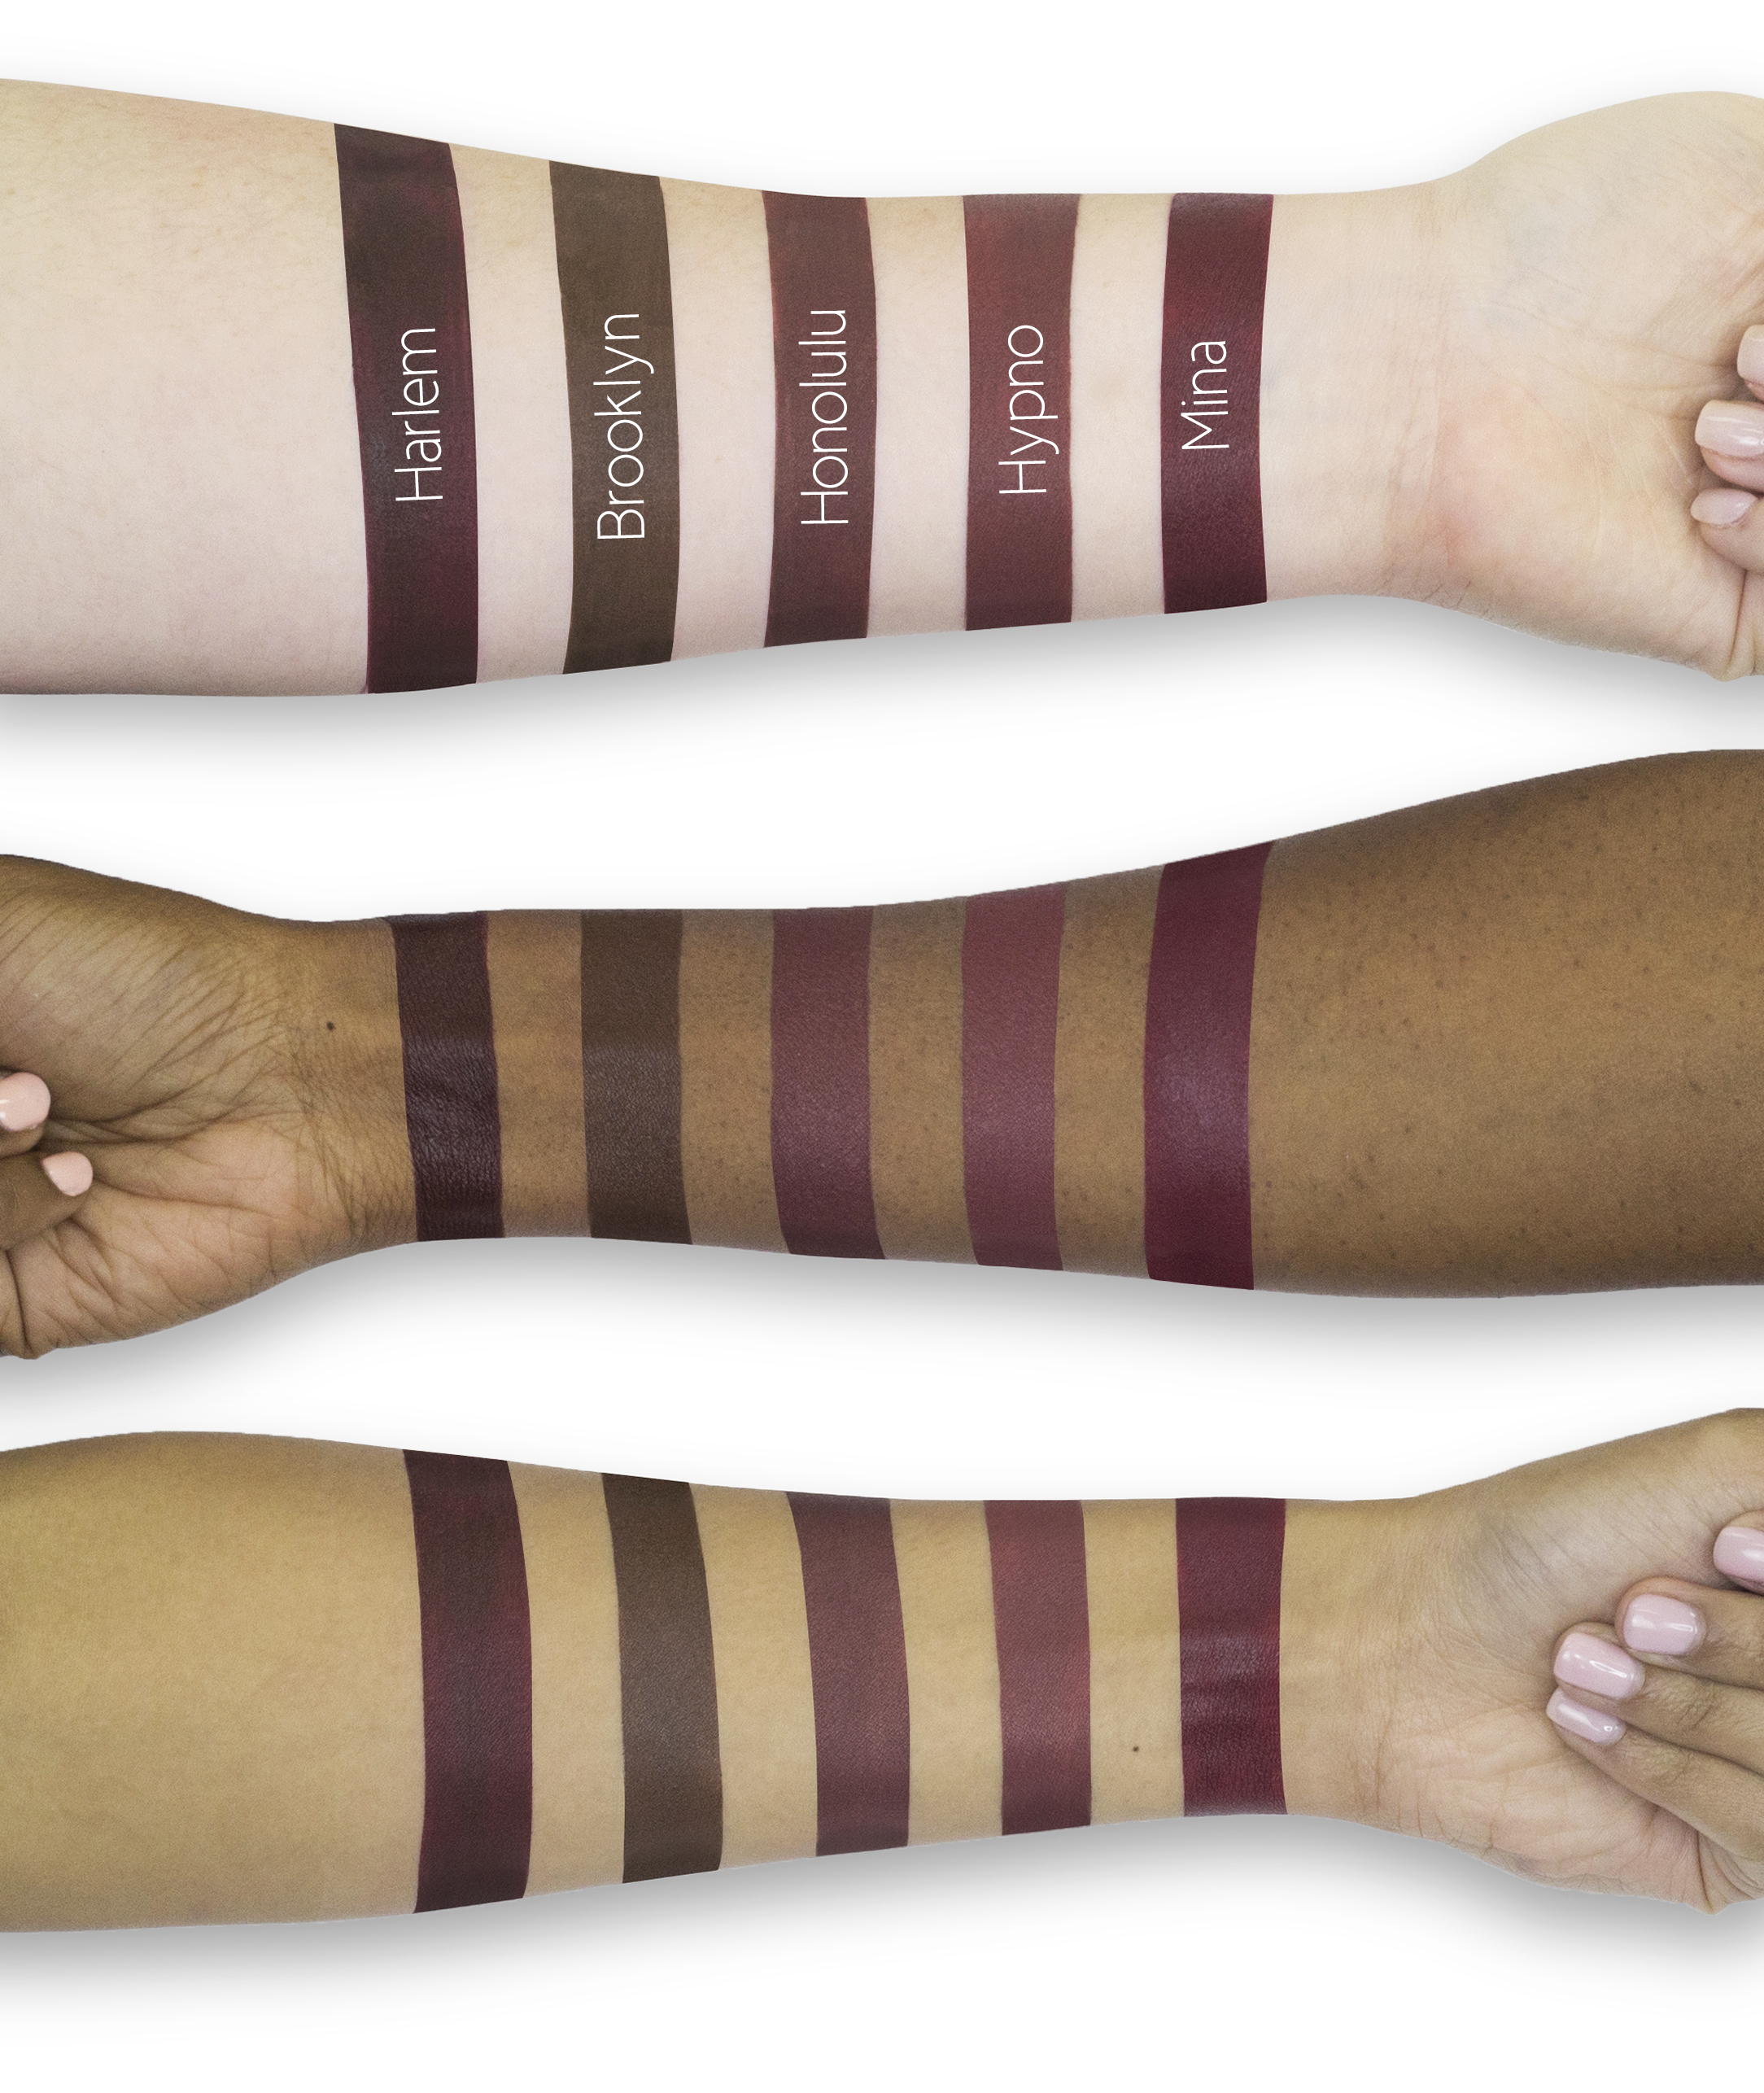 Mauves_and_Browns-SWATCHES-with_text-_5-CROP_4912bbb4-039d-45c3-8651-d6e89504cc2f.png